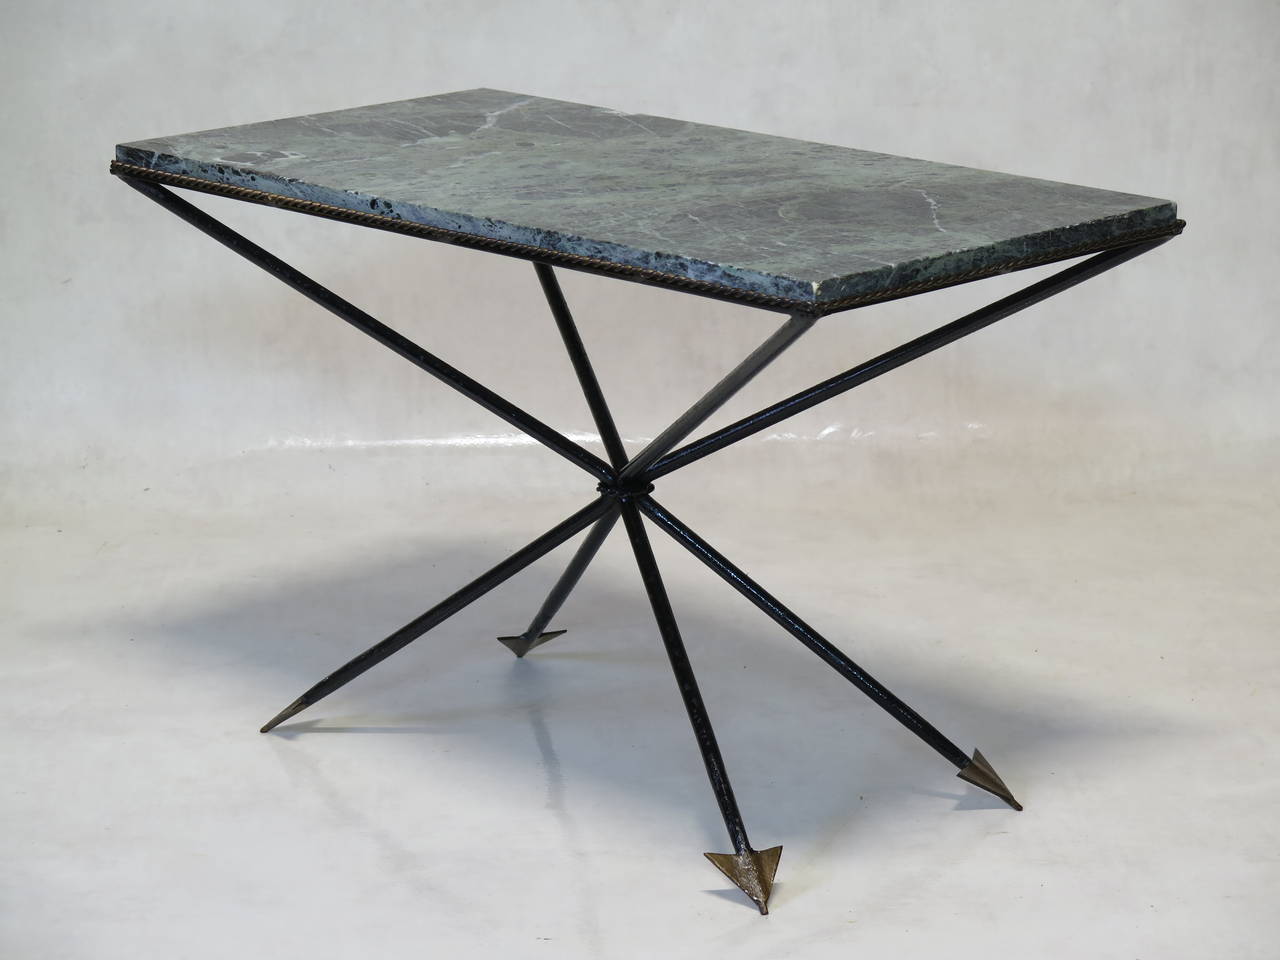 A chic wrought iron coffee table, painted a glossy black, with gilt arrow-heads and twisted rope detail on the table top surround.

The top is green marble, veined with black and white.